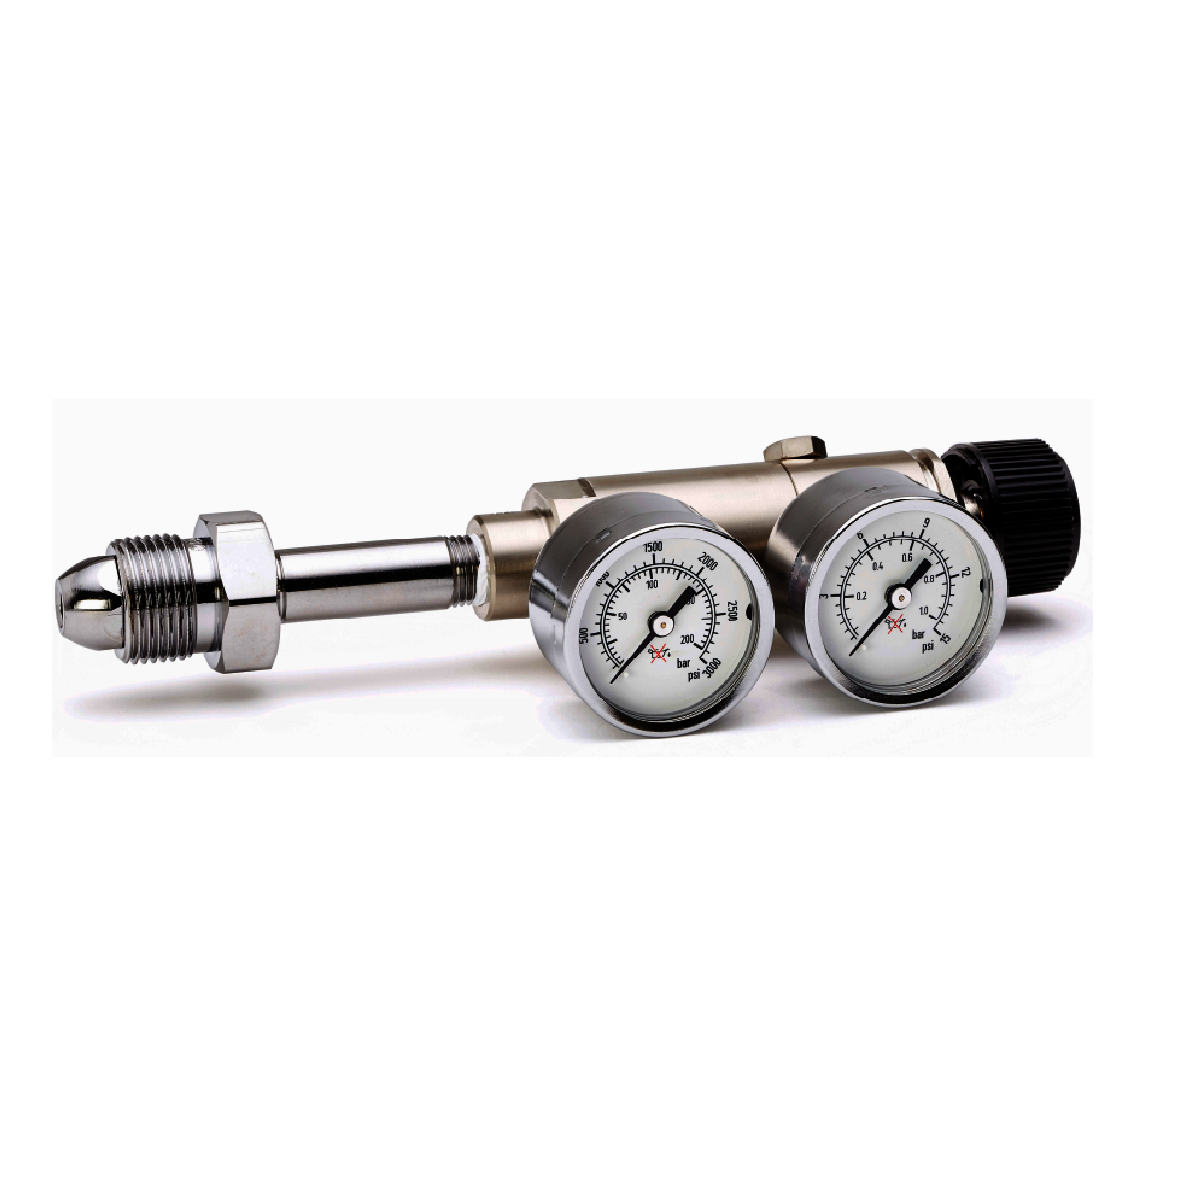 Airgas Model 14 Nickel-Plated Brass High Purity Two Stage Regulator With CGA-330 Connection